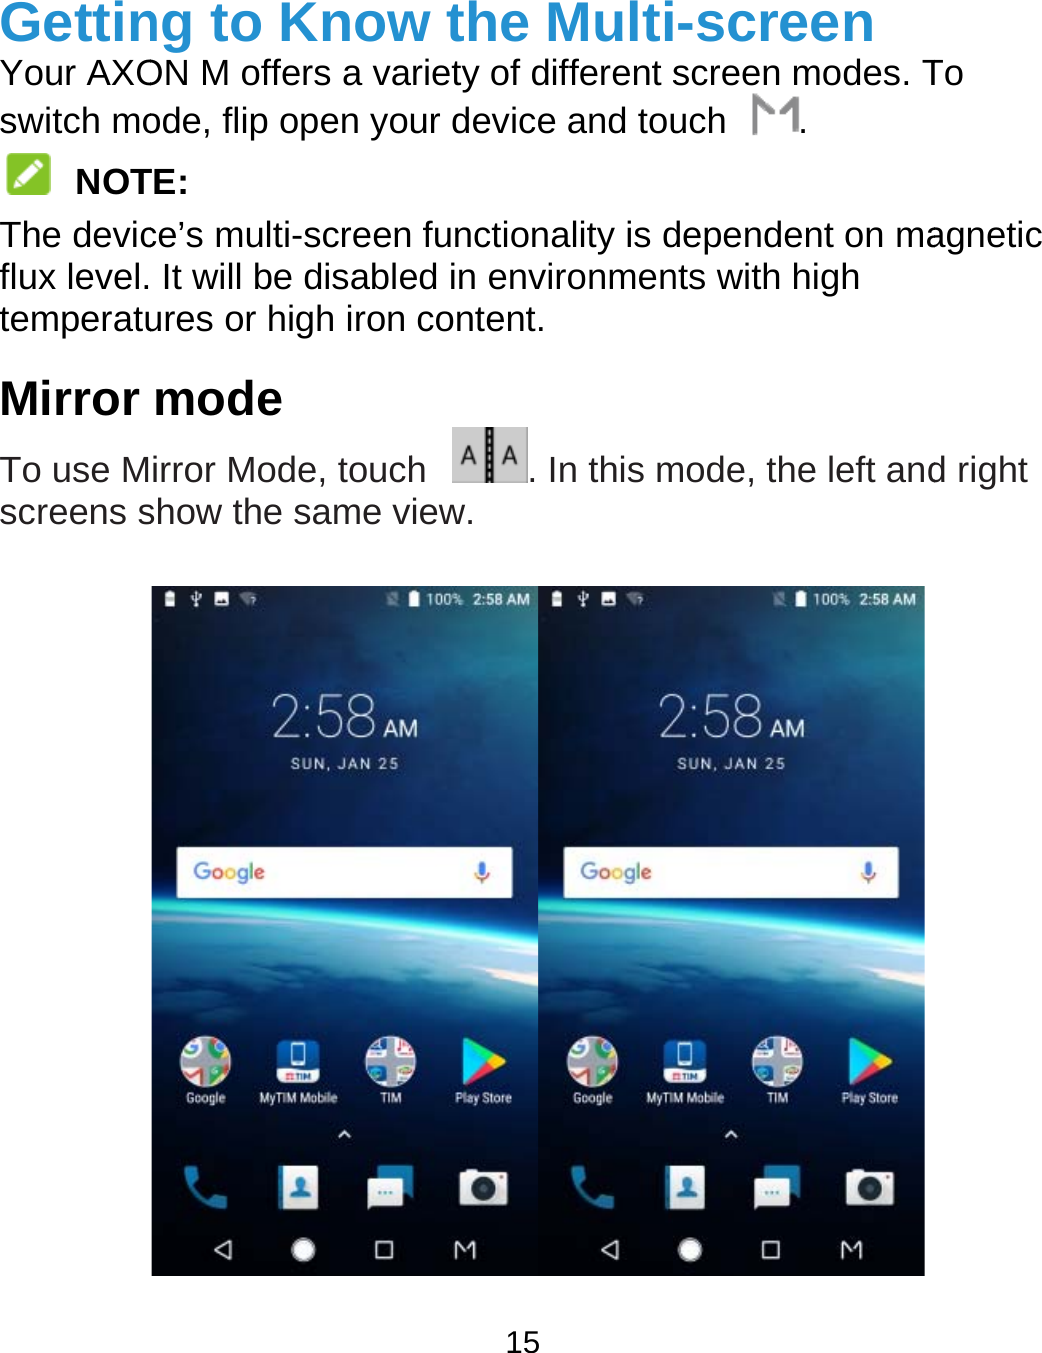  GettinYour AXOswitch mo NOTThe devicflux level.temperatuMirror To use Mscreens s              ng to KnowON M offers a vaode, flip open youTE: ce’s multi-screen It will be disableures or high iron mode irror Mode, touchshow the same v15 w the Multiriety of different sur device and tou functionality is ded in environmencontent. h  . In this miew. -screen screen modes. Tuch .  dependent on mants with high mode, the left andTo agnetic d right 